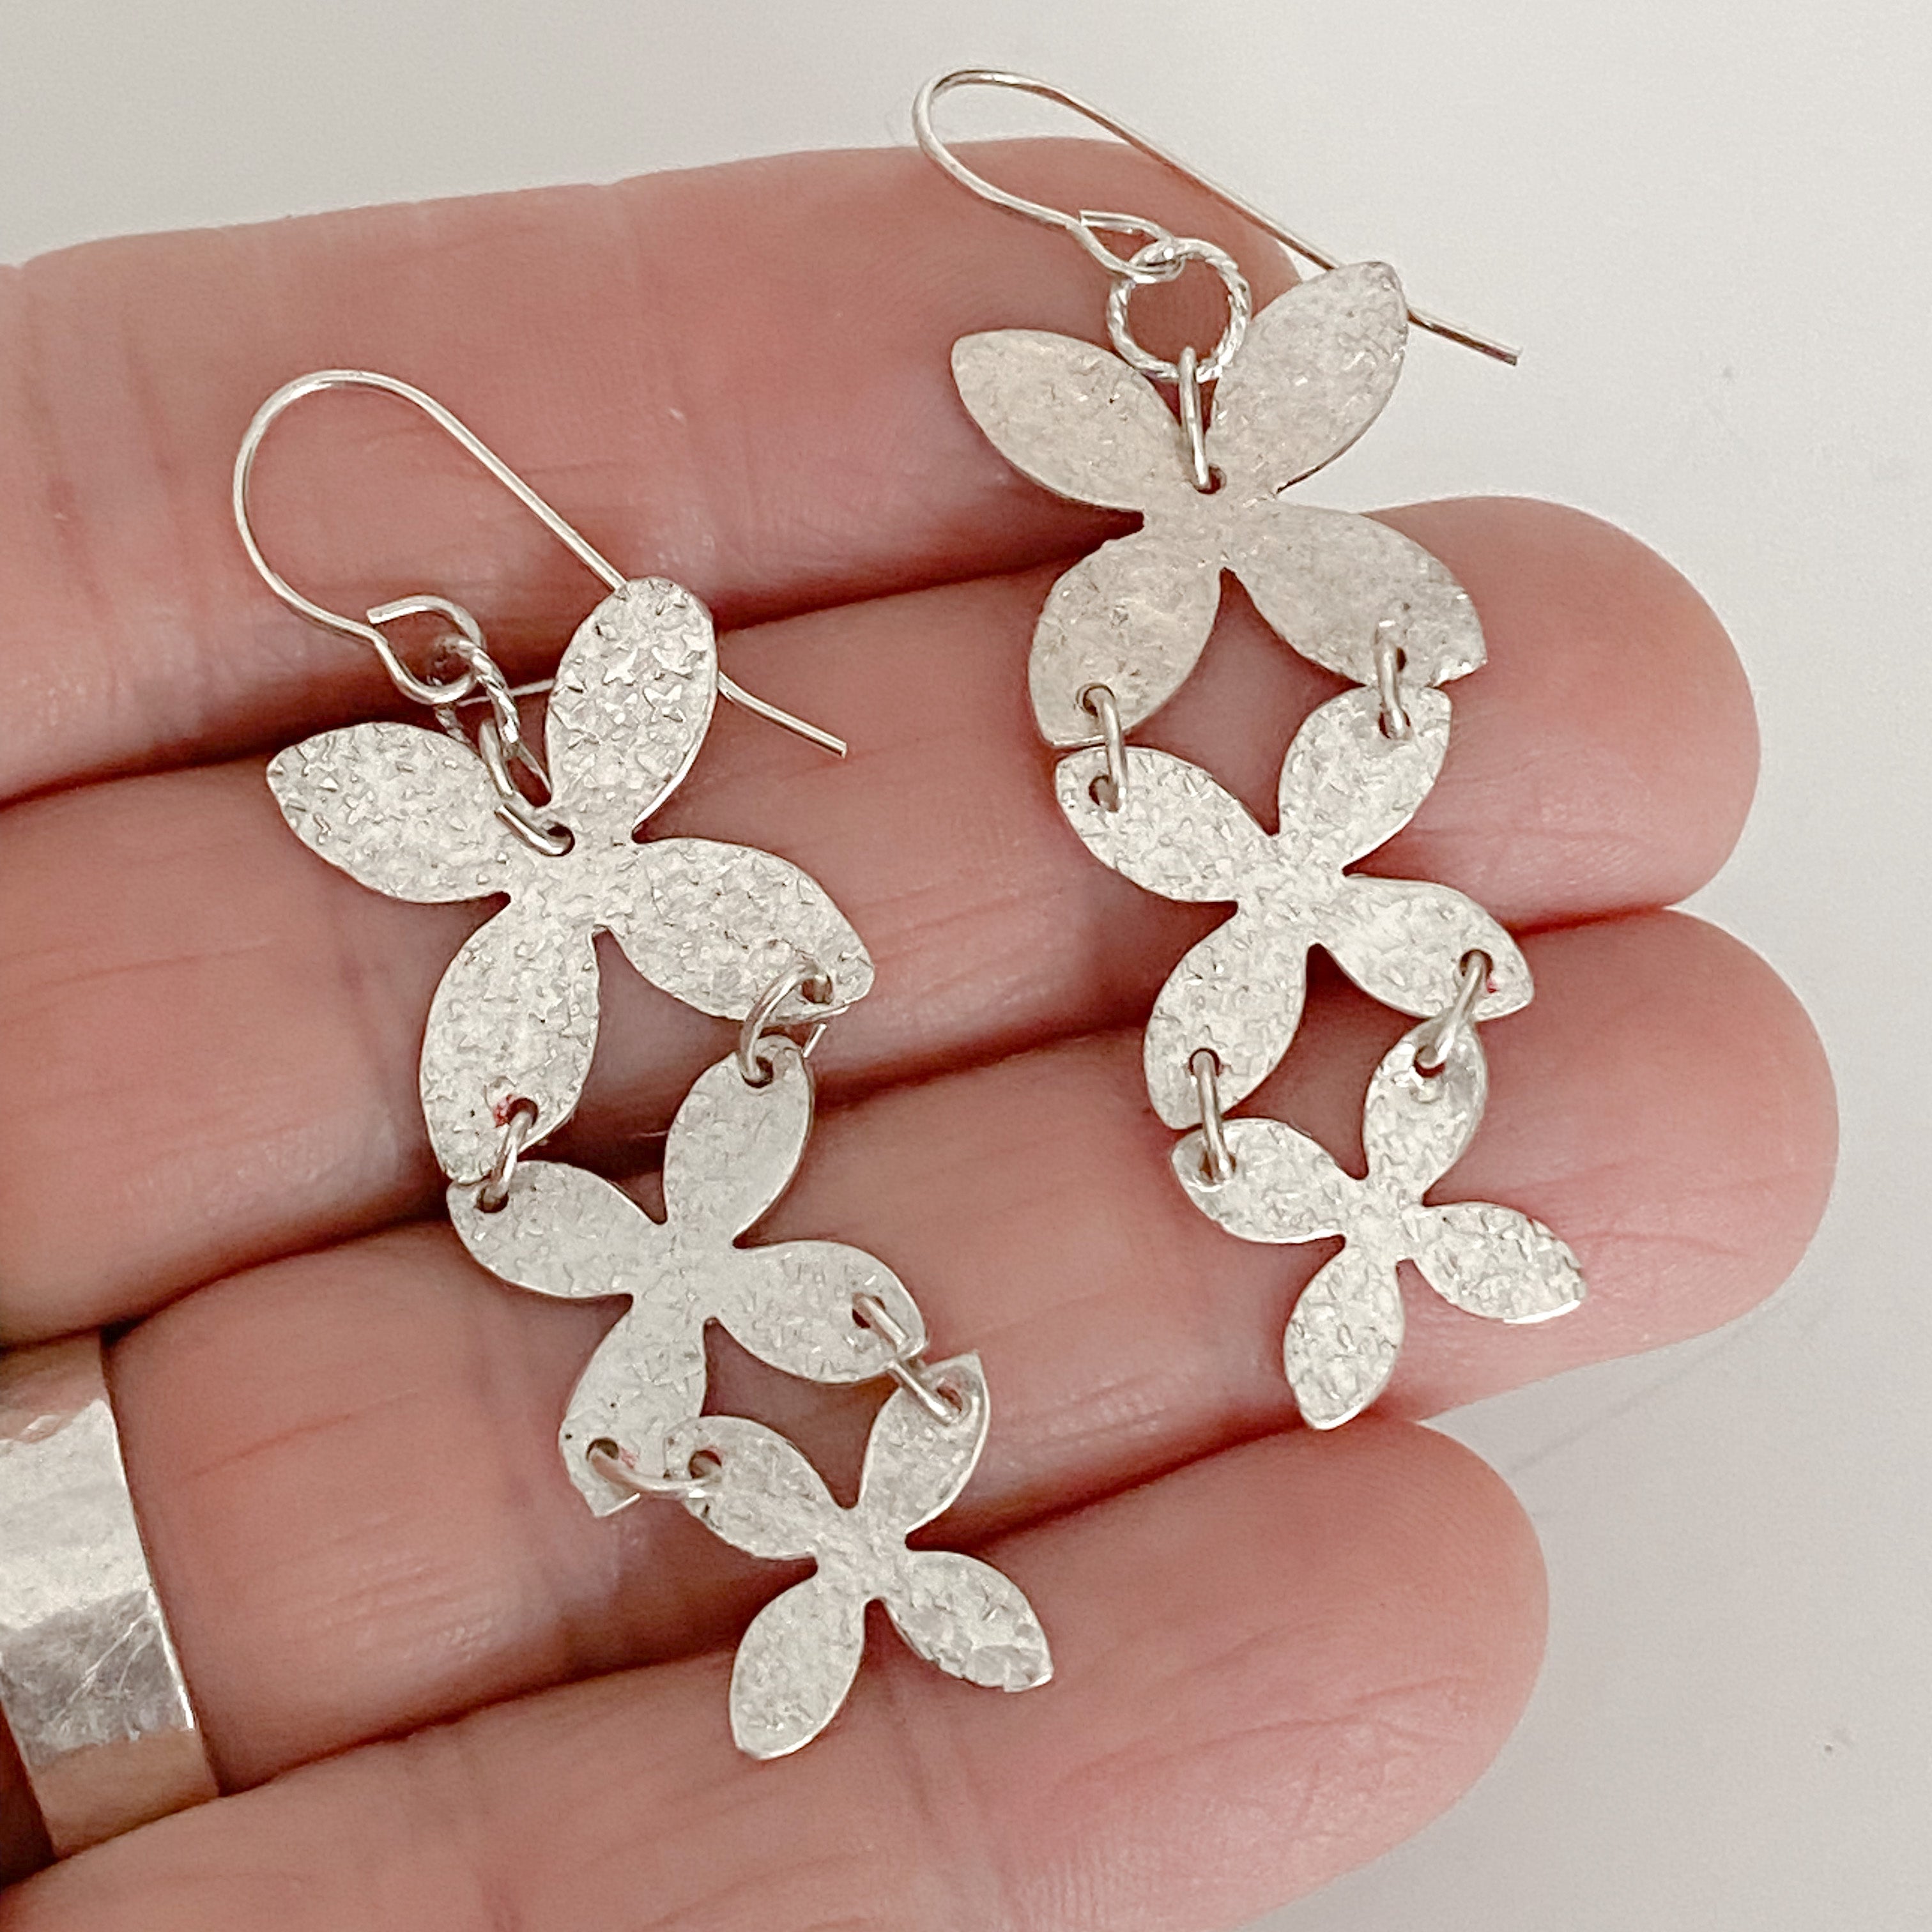 Ashley Earring - Silver, Floral Statement Earring